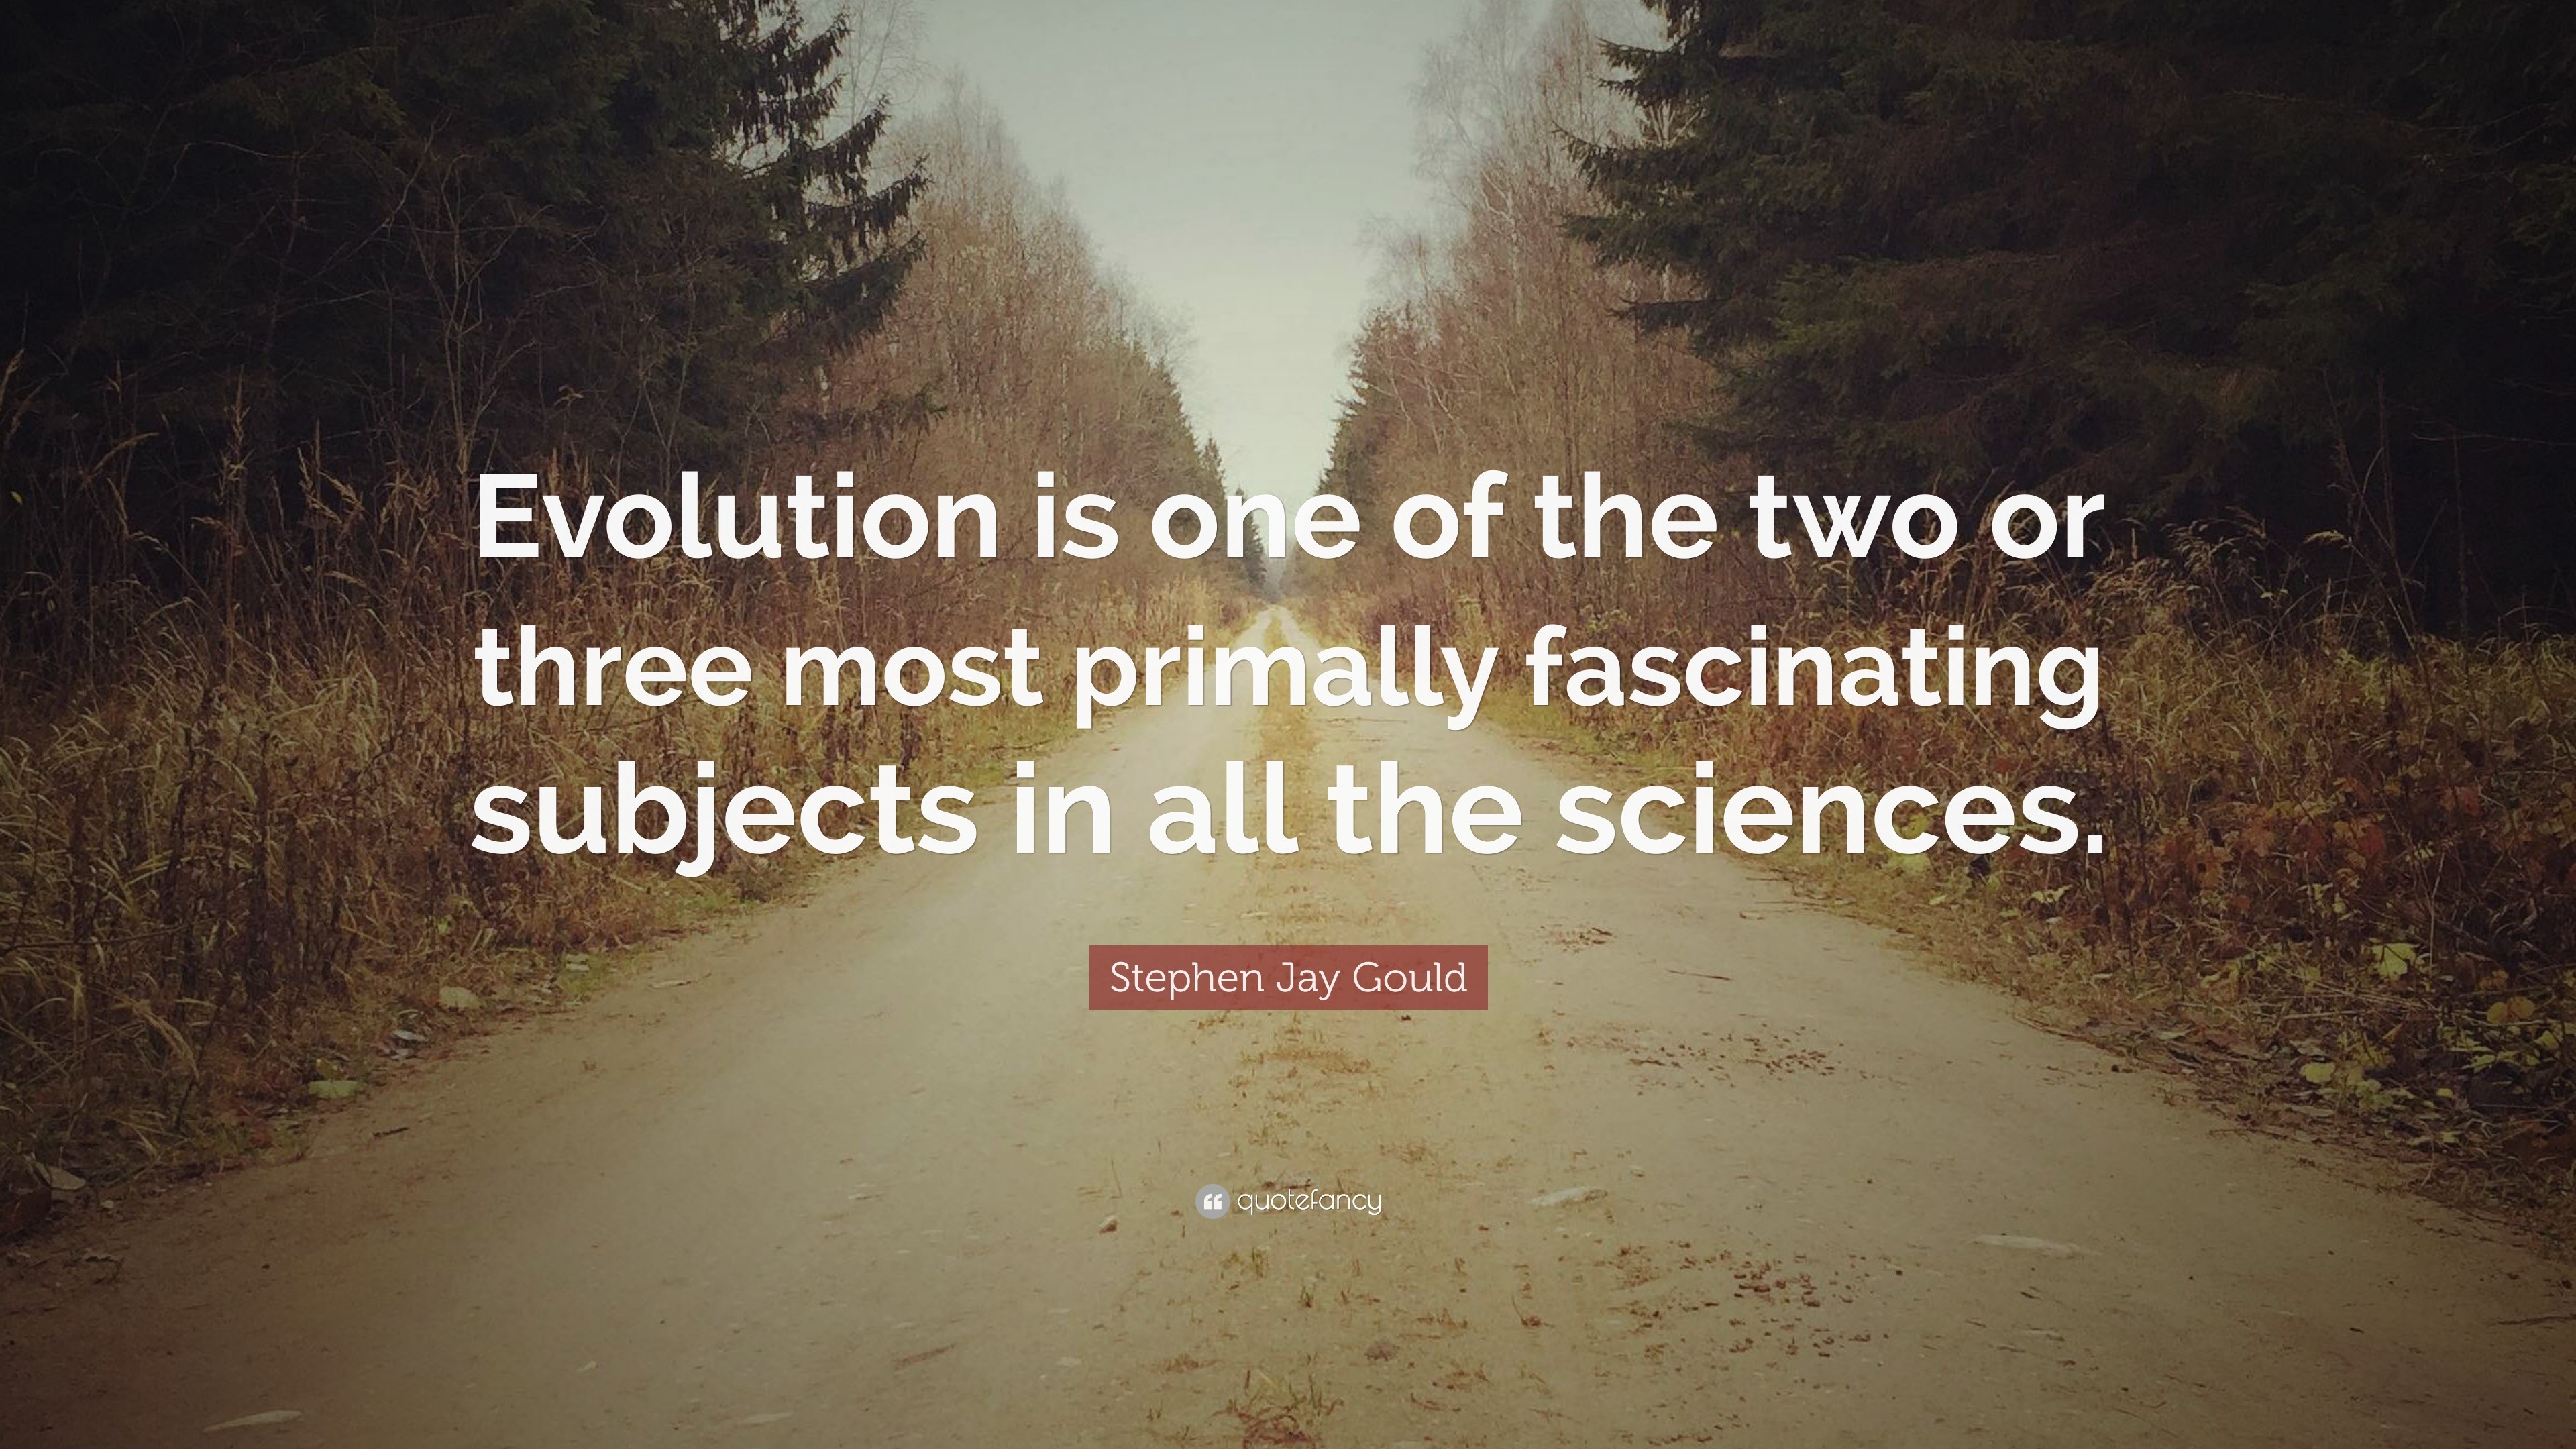 Stephen Jay Gould Quote: “Evolution is one of the two or three most